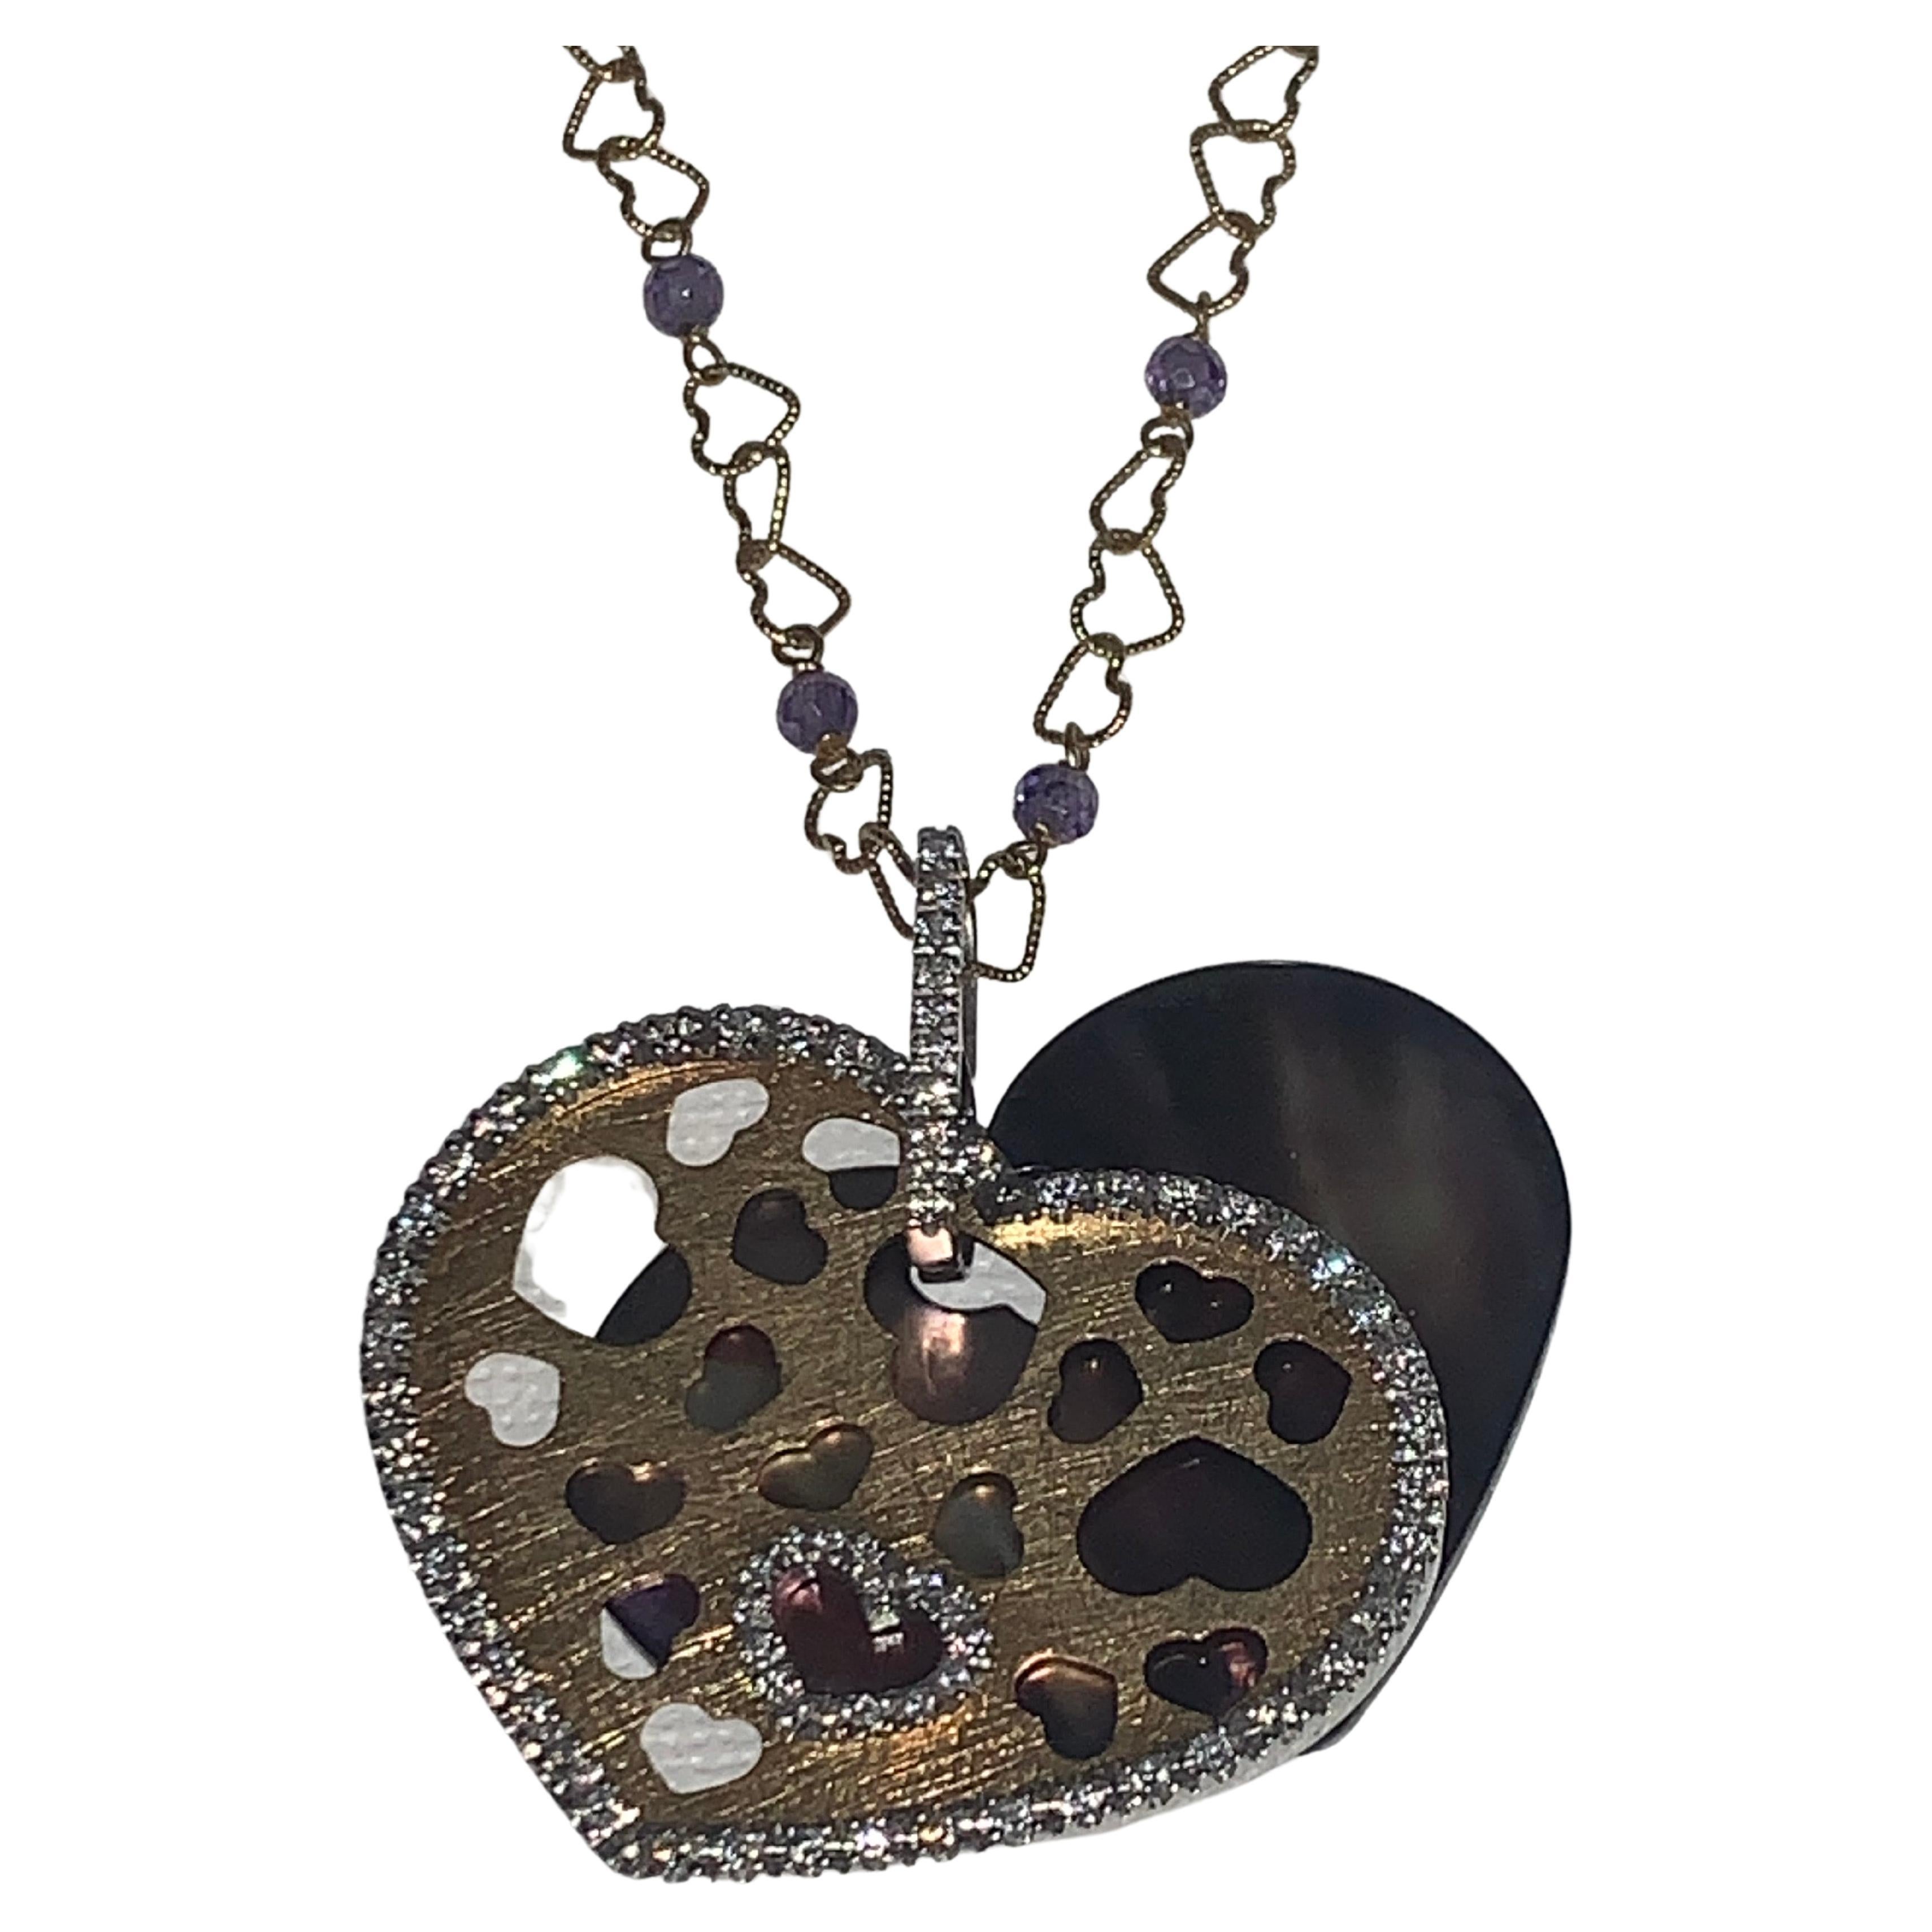 Pavé Diamond, Mother of Pearl, Nanis Heart Necklace.

Featuring a Pavé  Diamonds, Purple Mother of Pearl, Nanis Heart Necklace with a total weight of 0.77 carats, set in 18K Yellow Gold; and 18K Yellow Gold Heart Link & Amethyst chain, Size 18